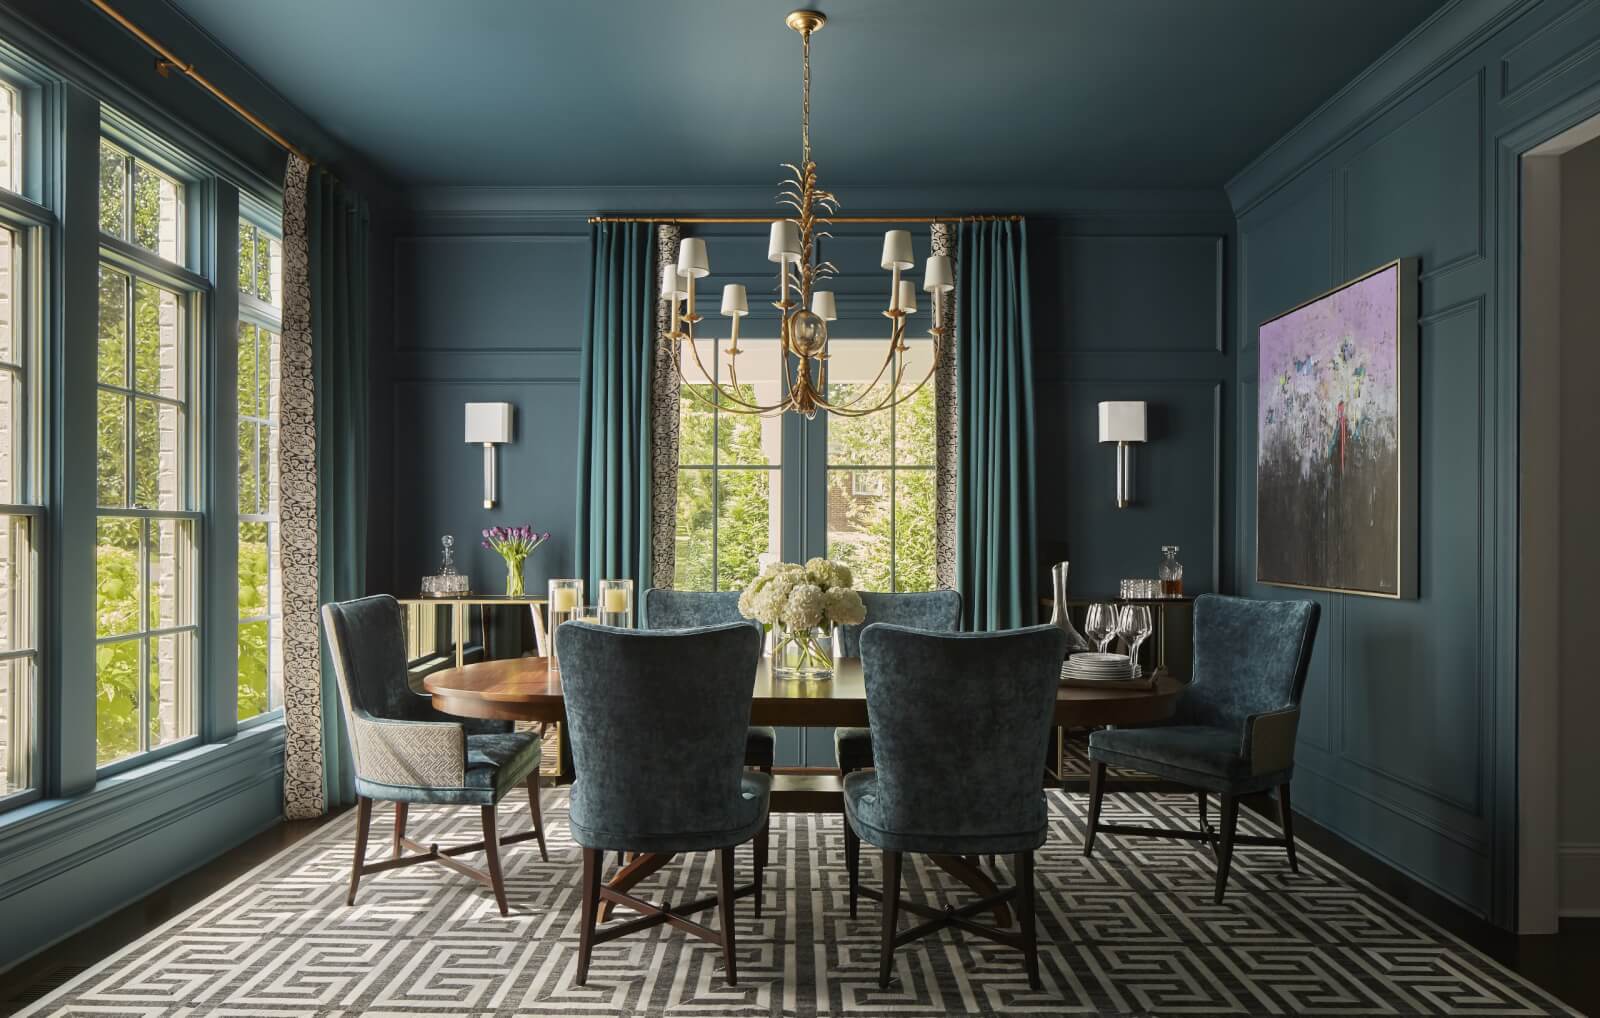 Teal-themed dining room with large round table and chairs.